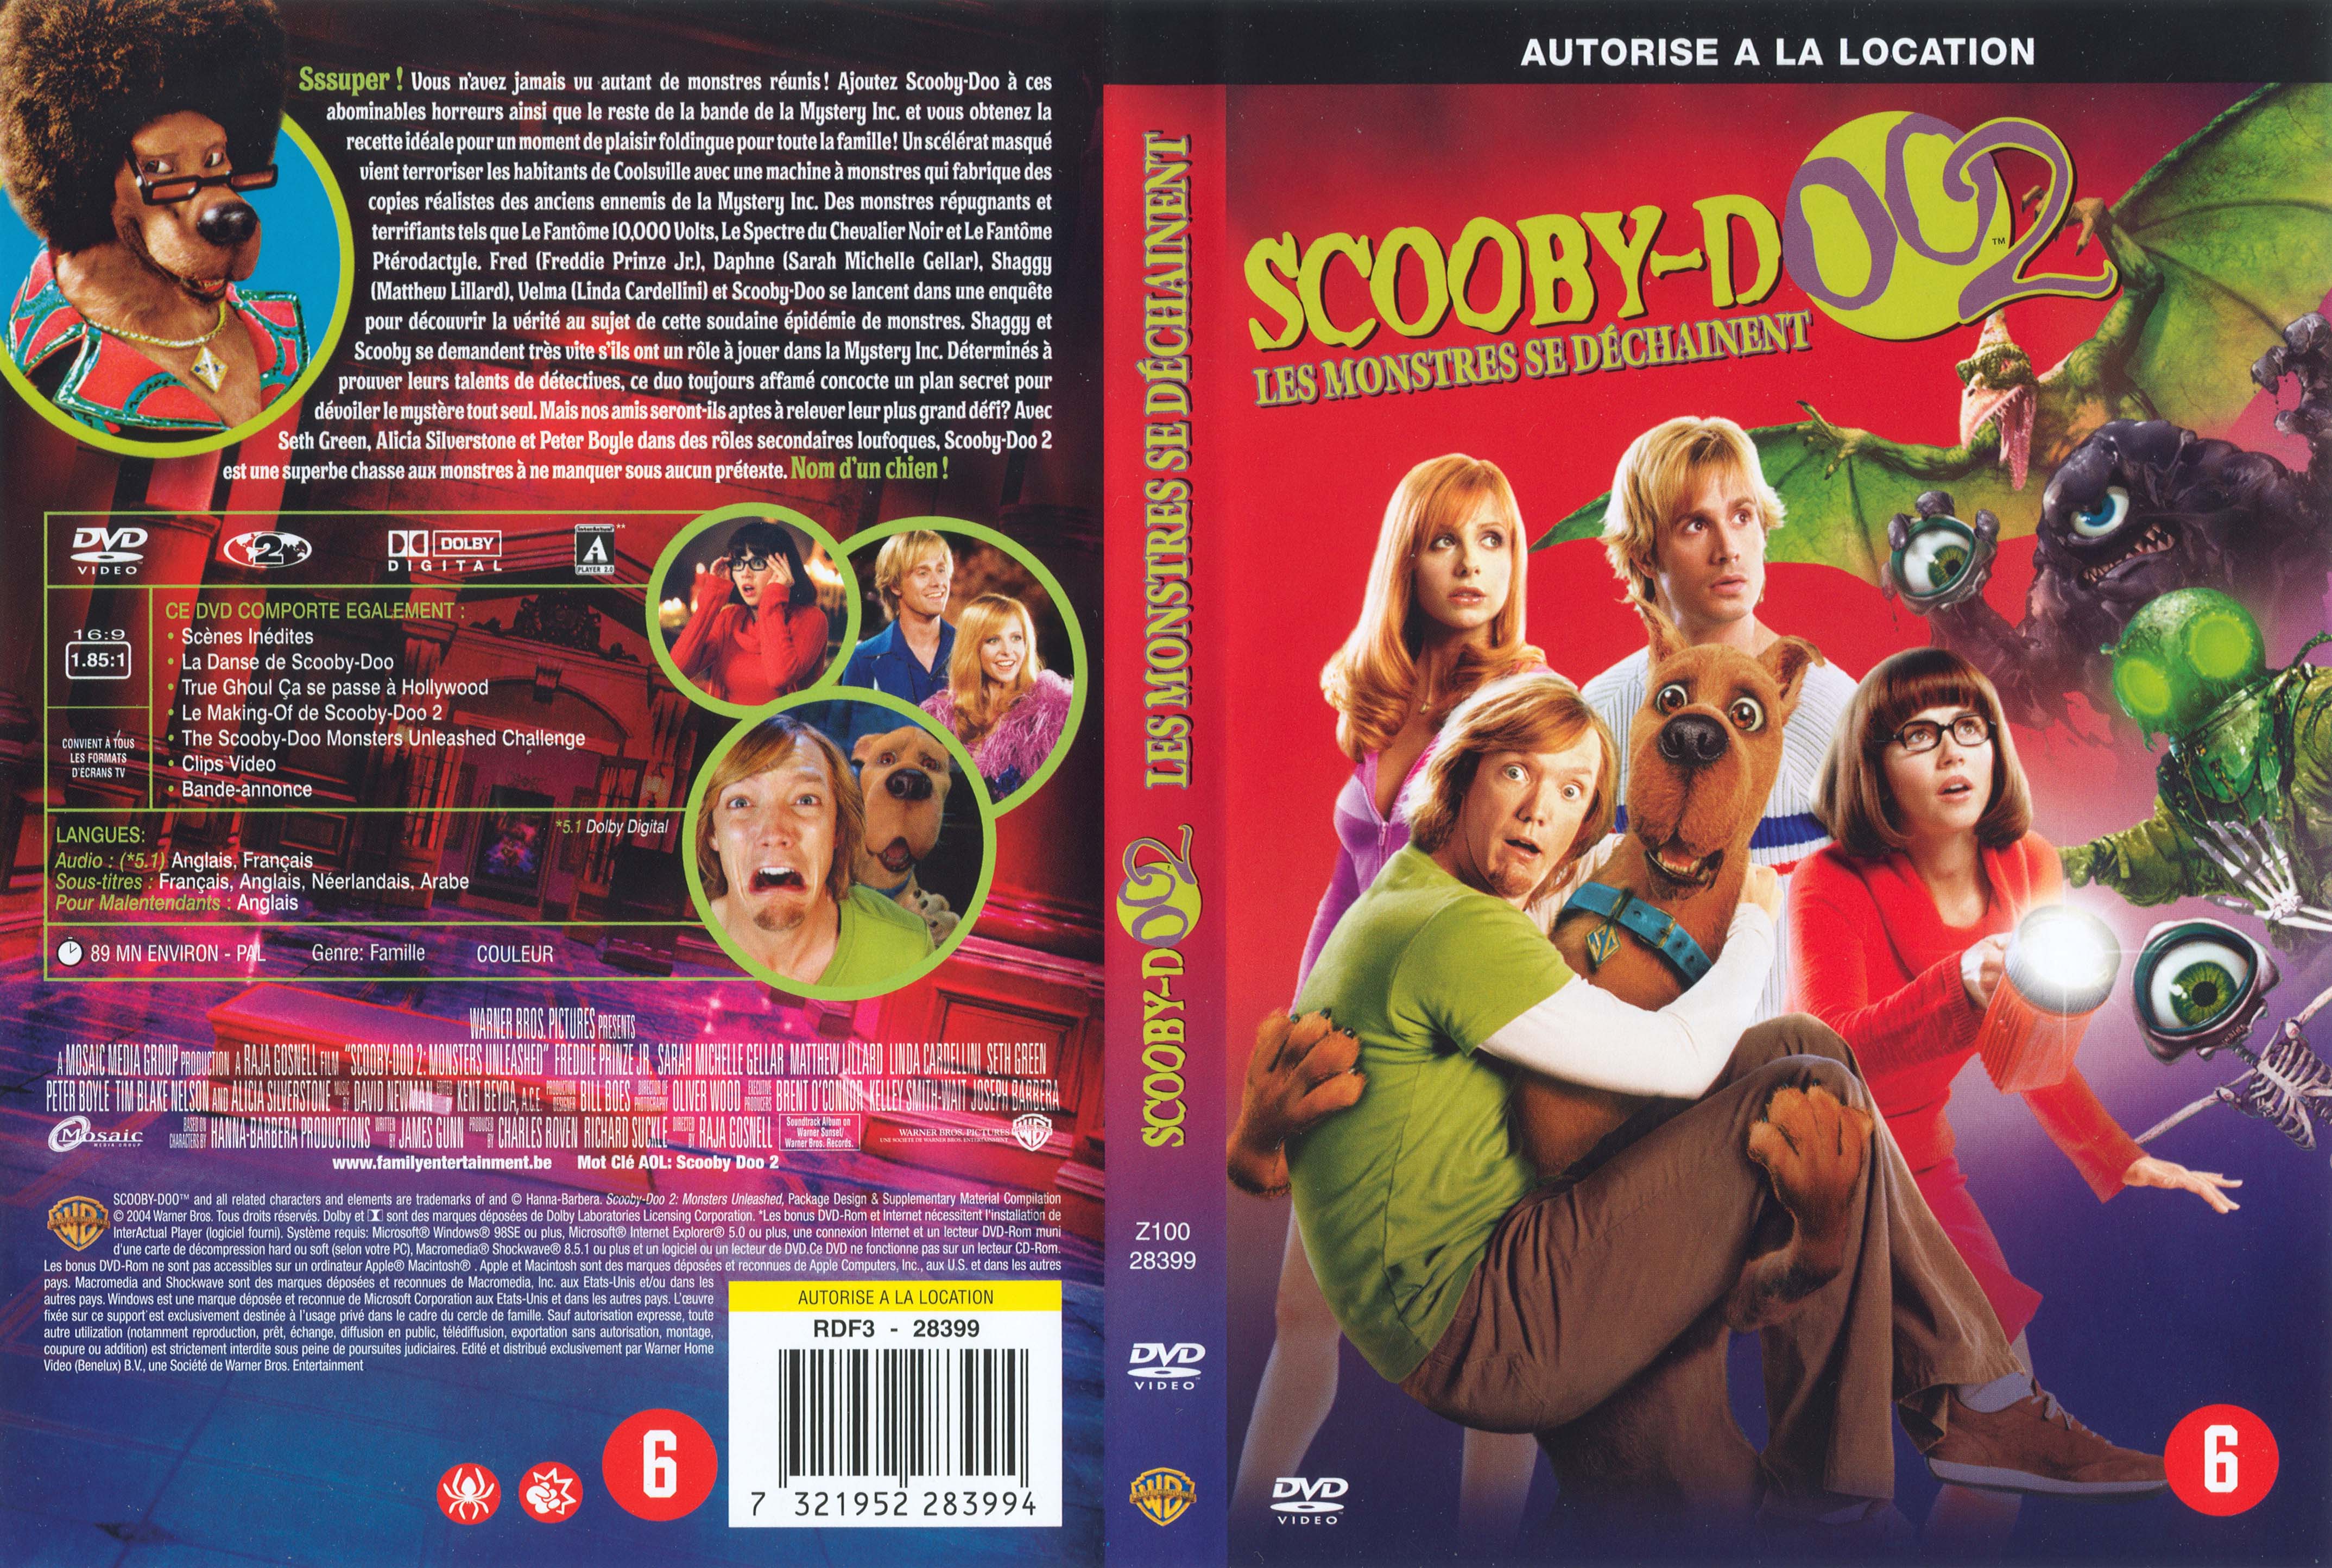 Jaquette DVD Scooby-doo 2 v2